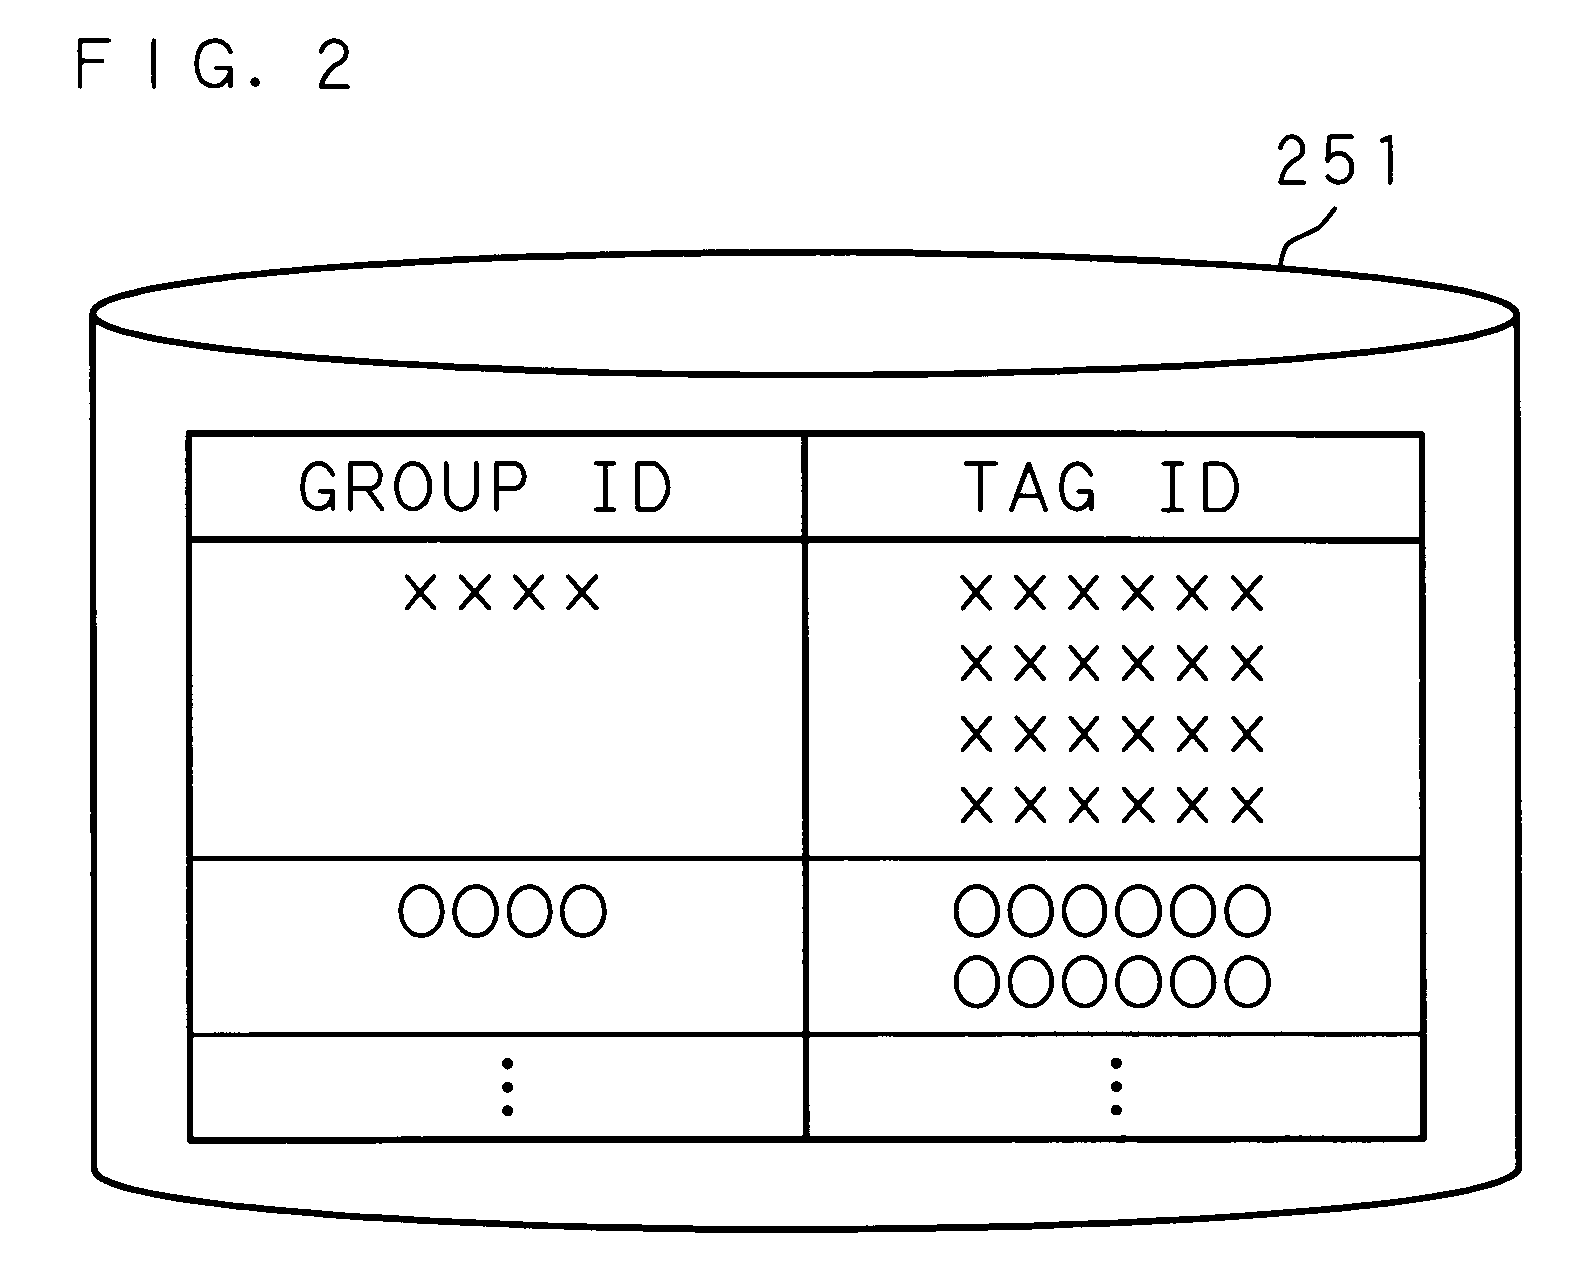 Memory product controller, memory product control method, and memory product